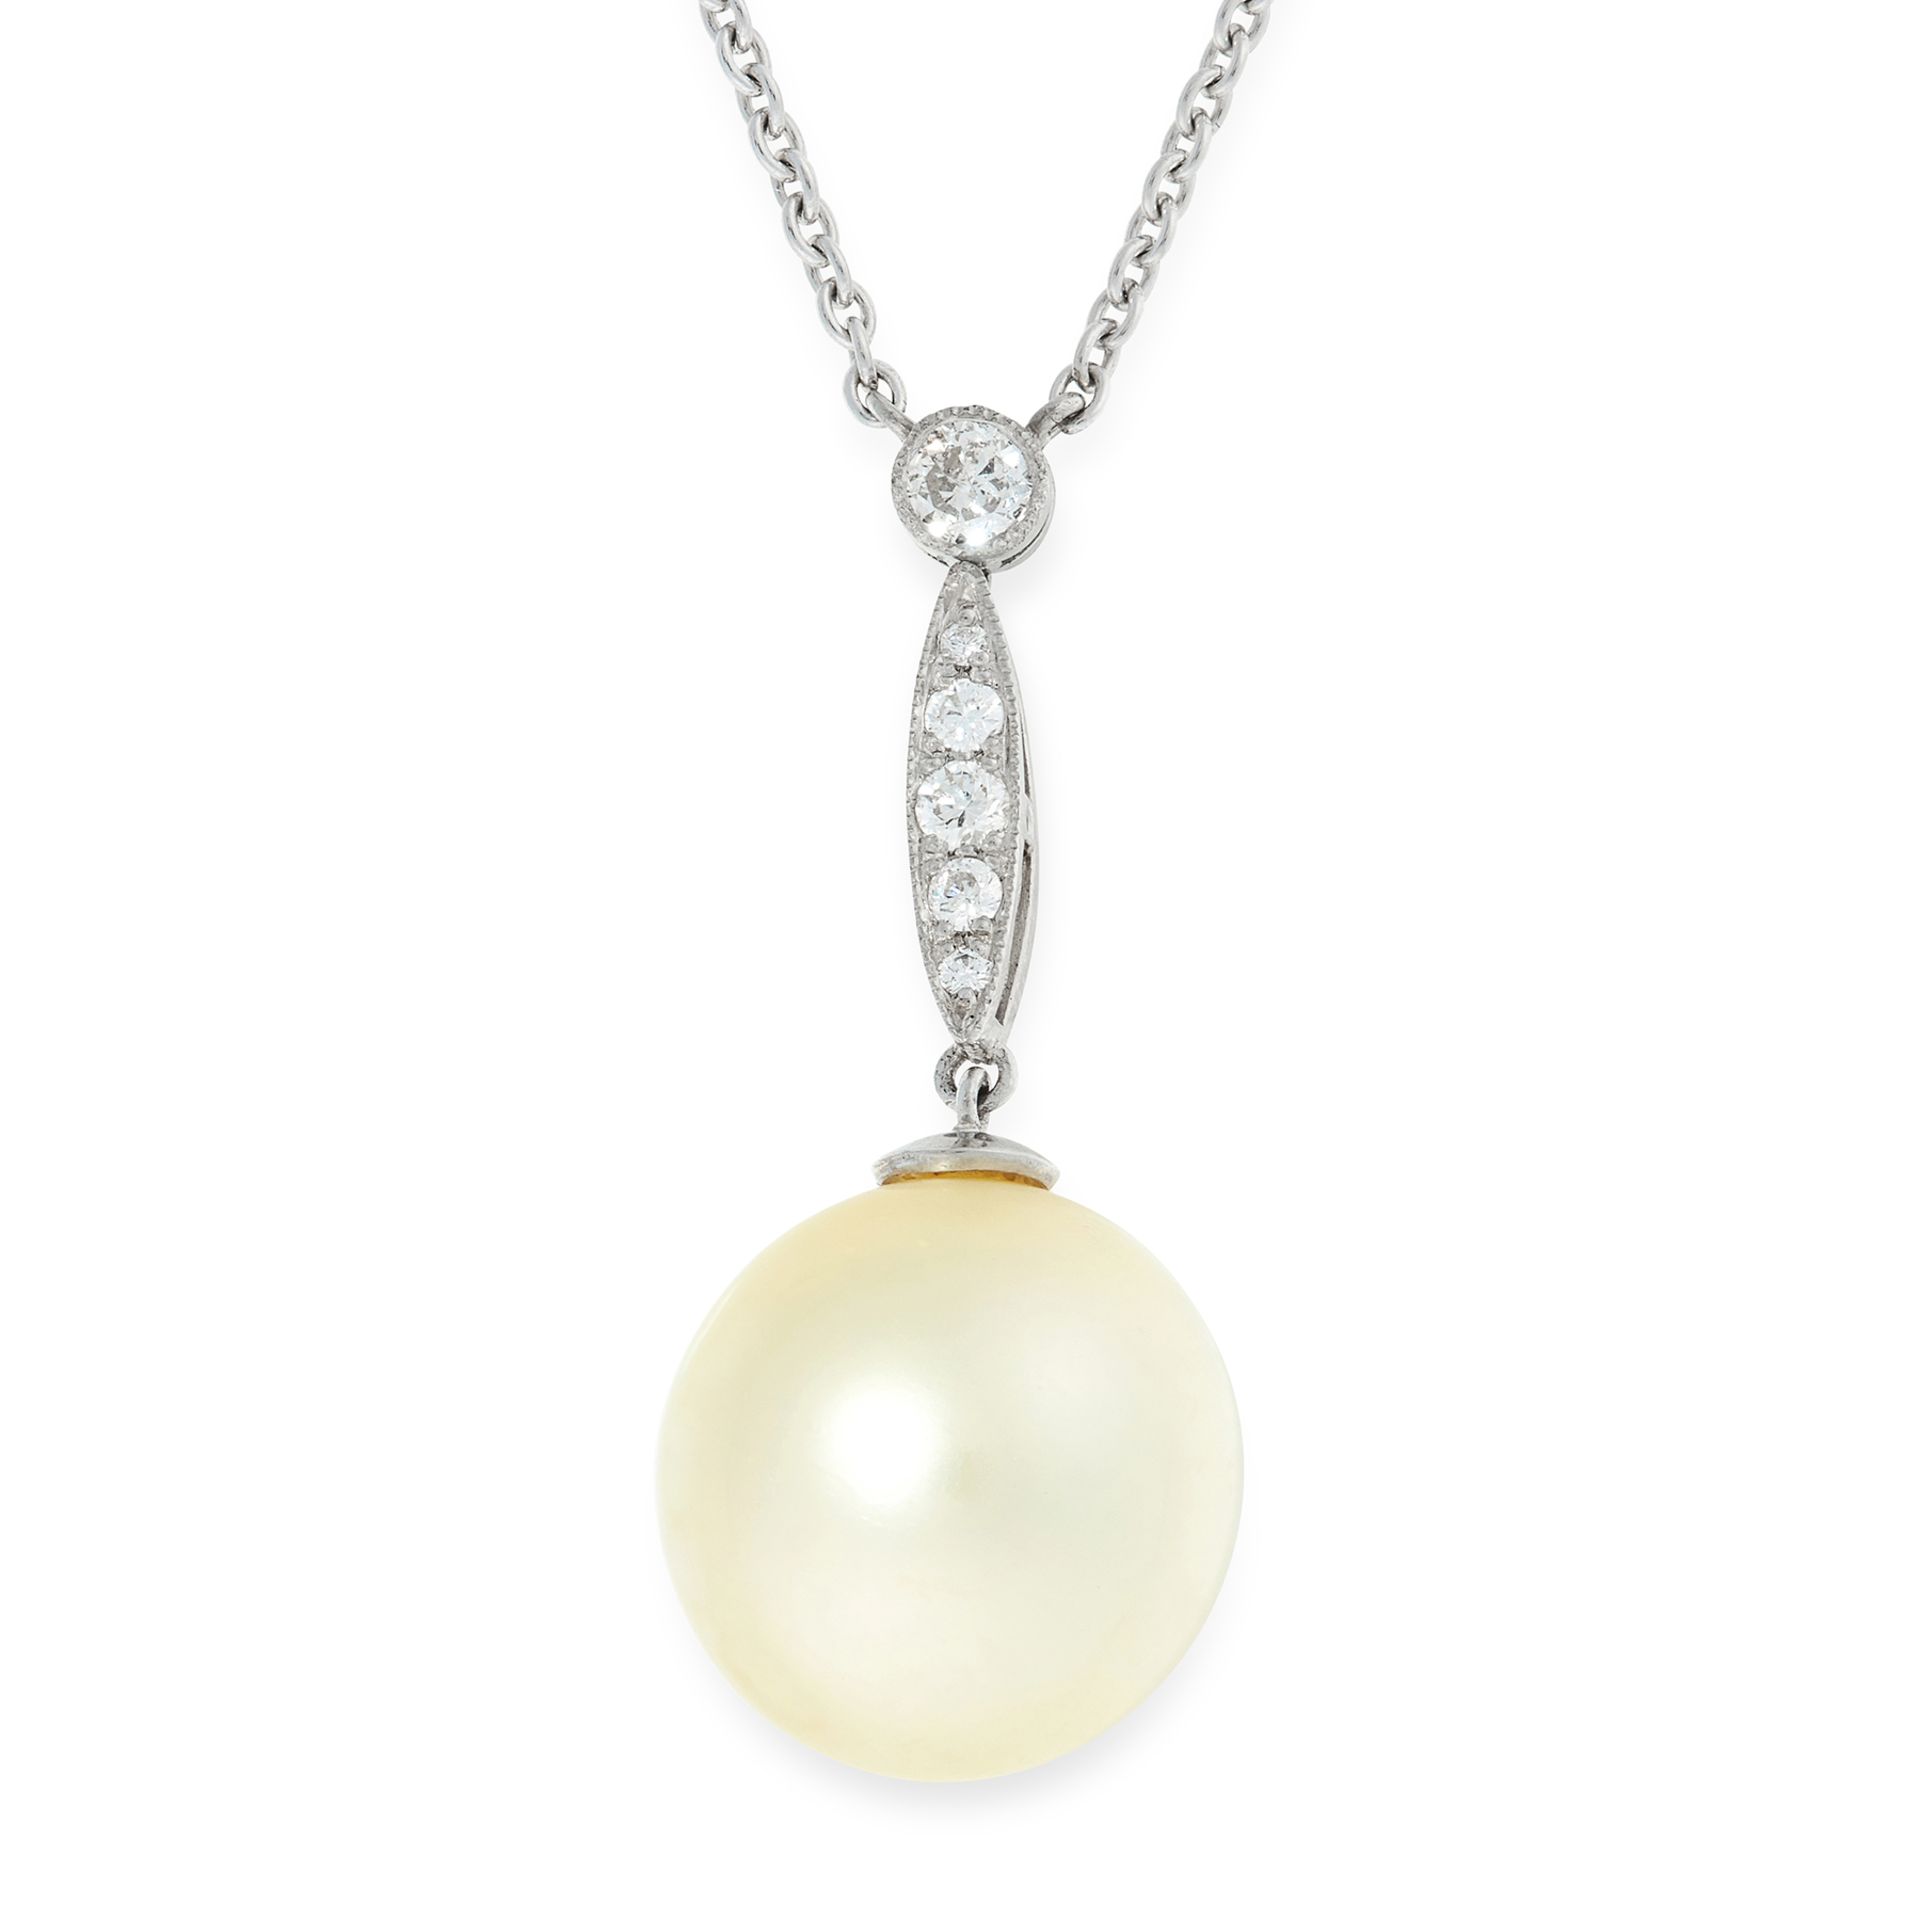 A PEARL AND DIAMOND PENDANT NECKLACE in 18ct white gold, set with a pearl of 14.5mm below a row of